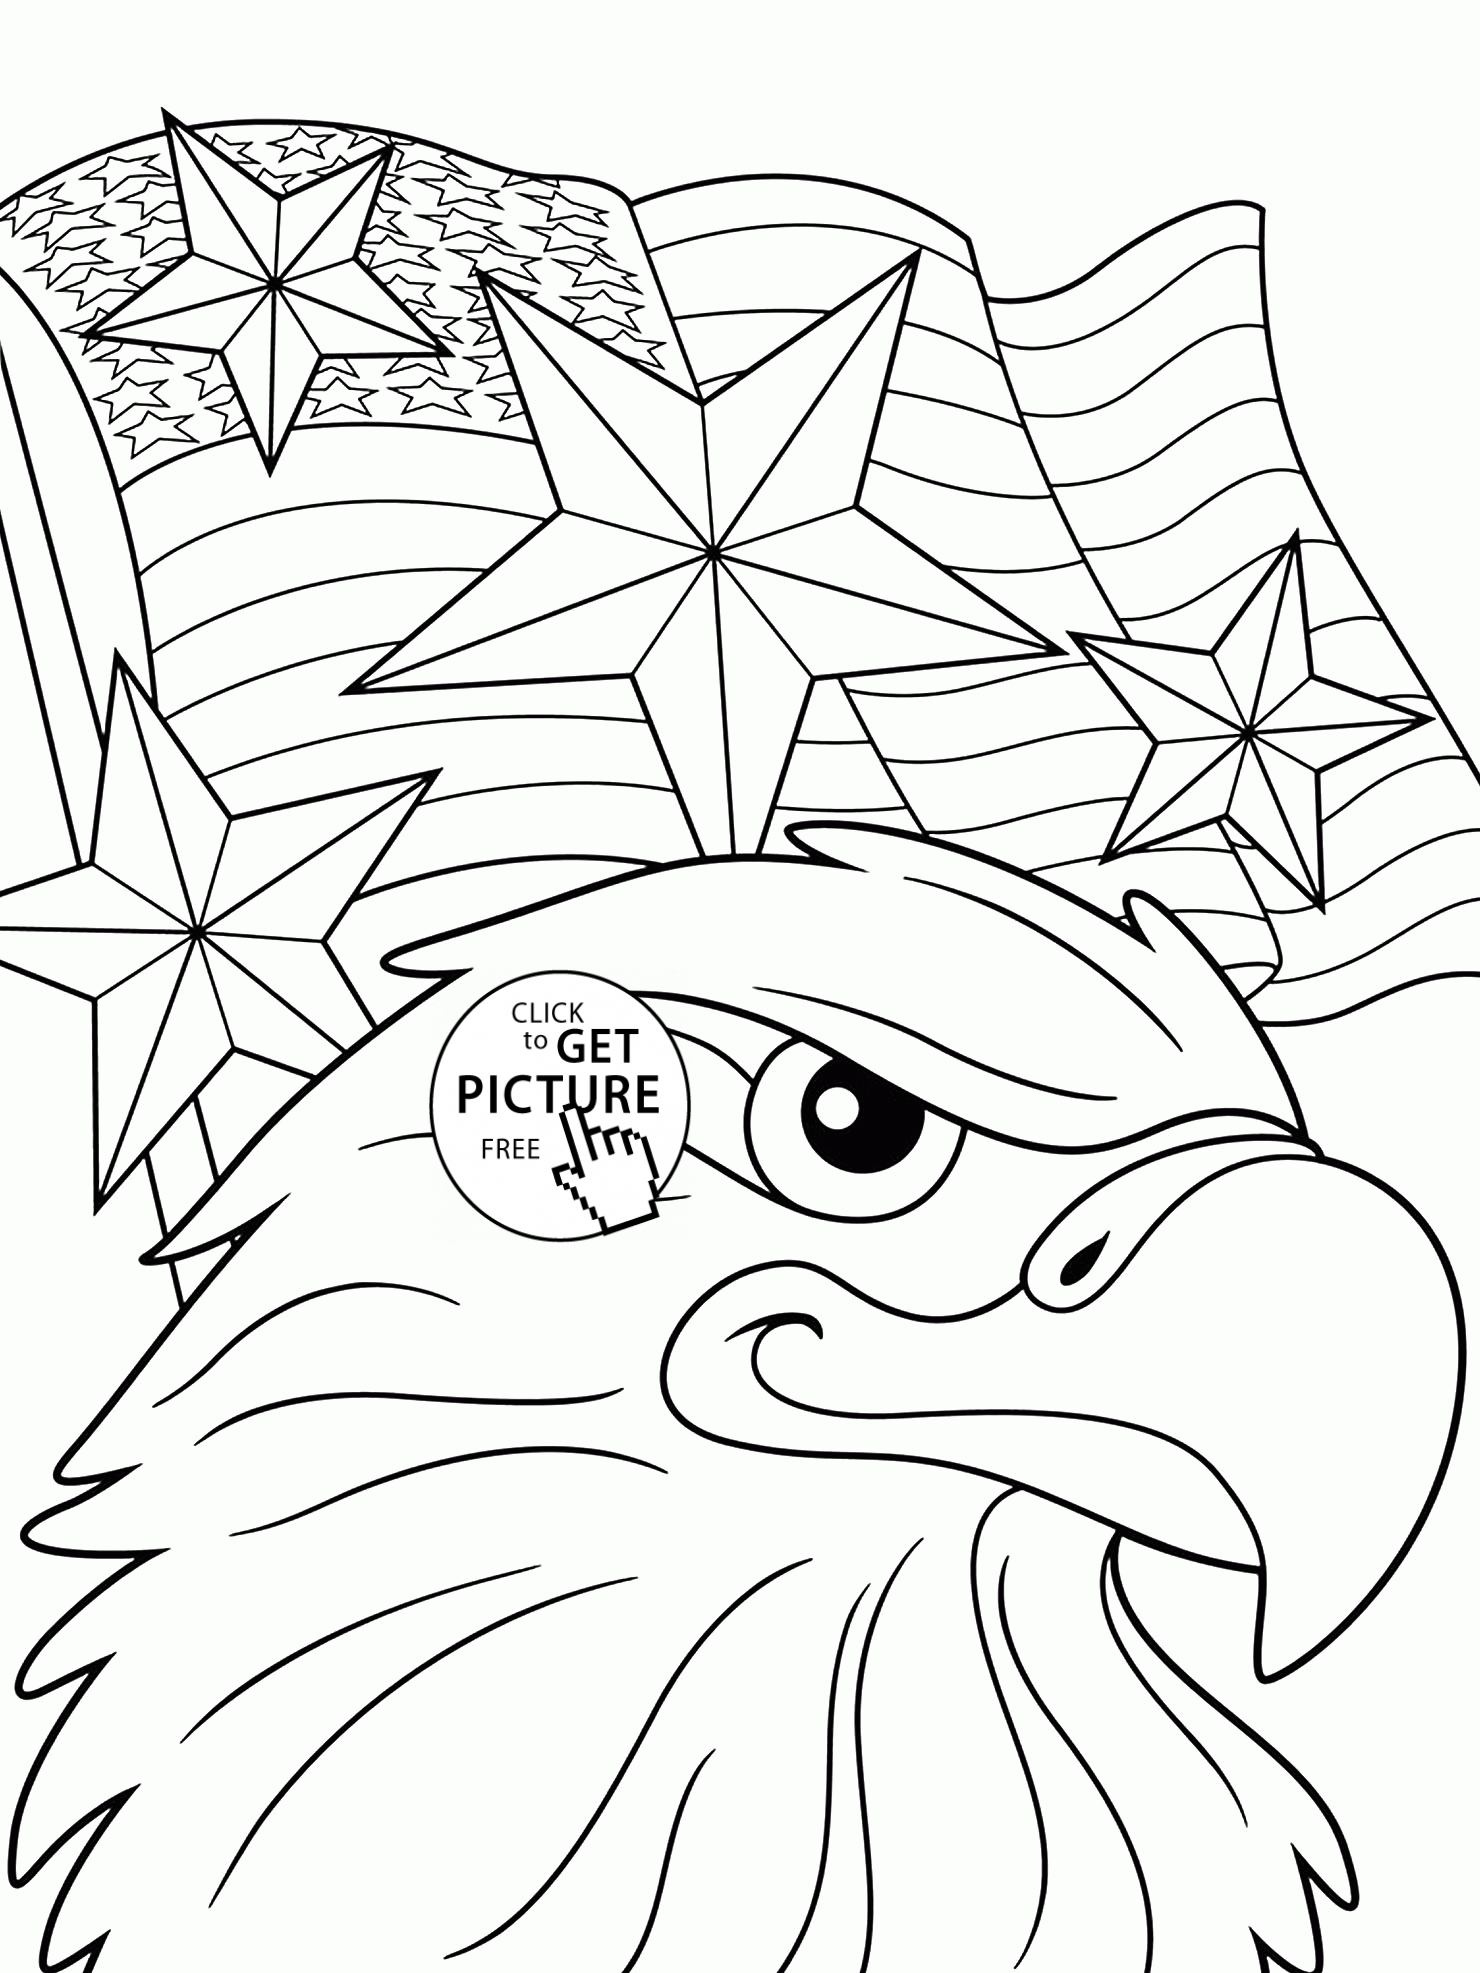 Eagle and Independence Day of America coloring page for kids ...